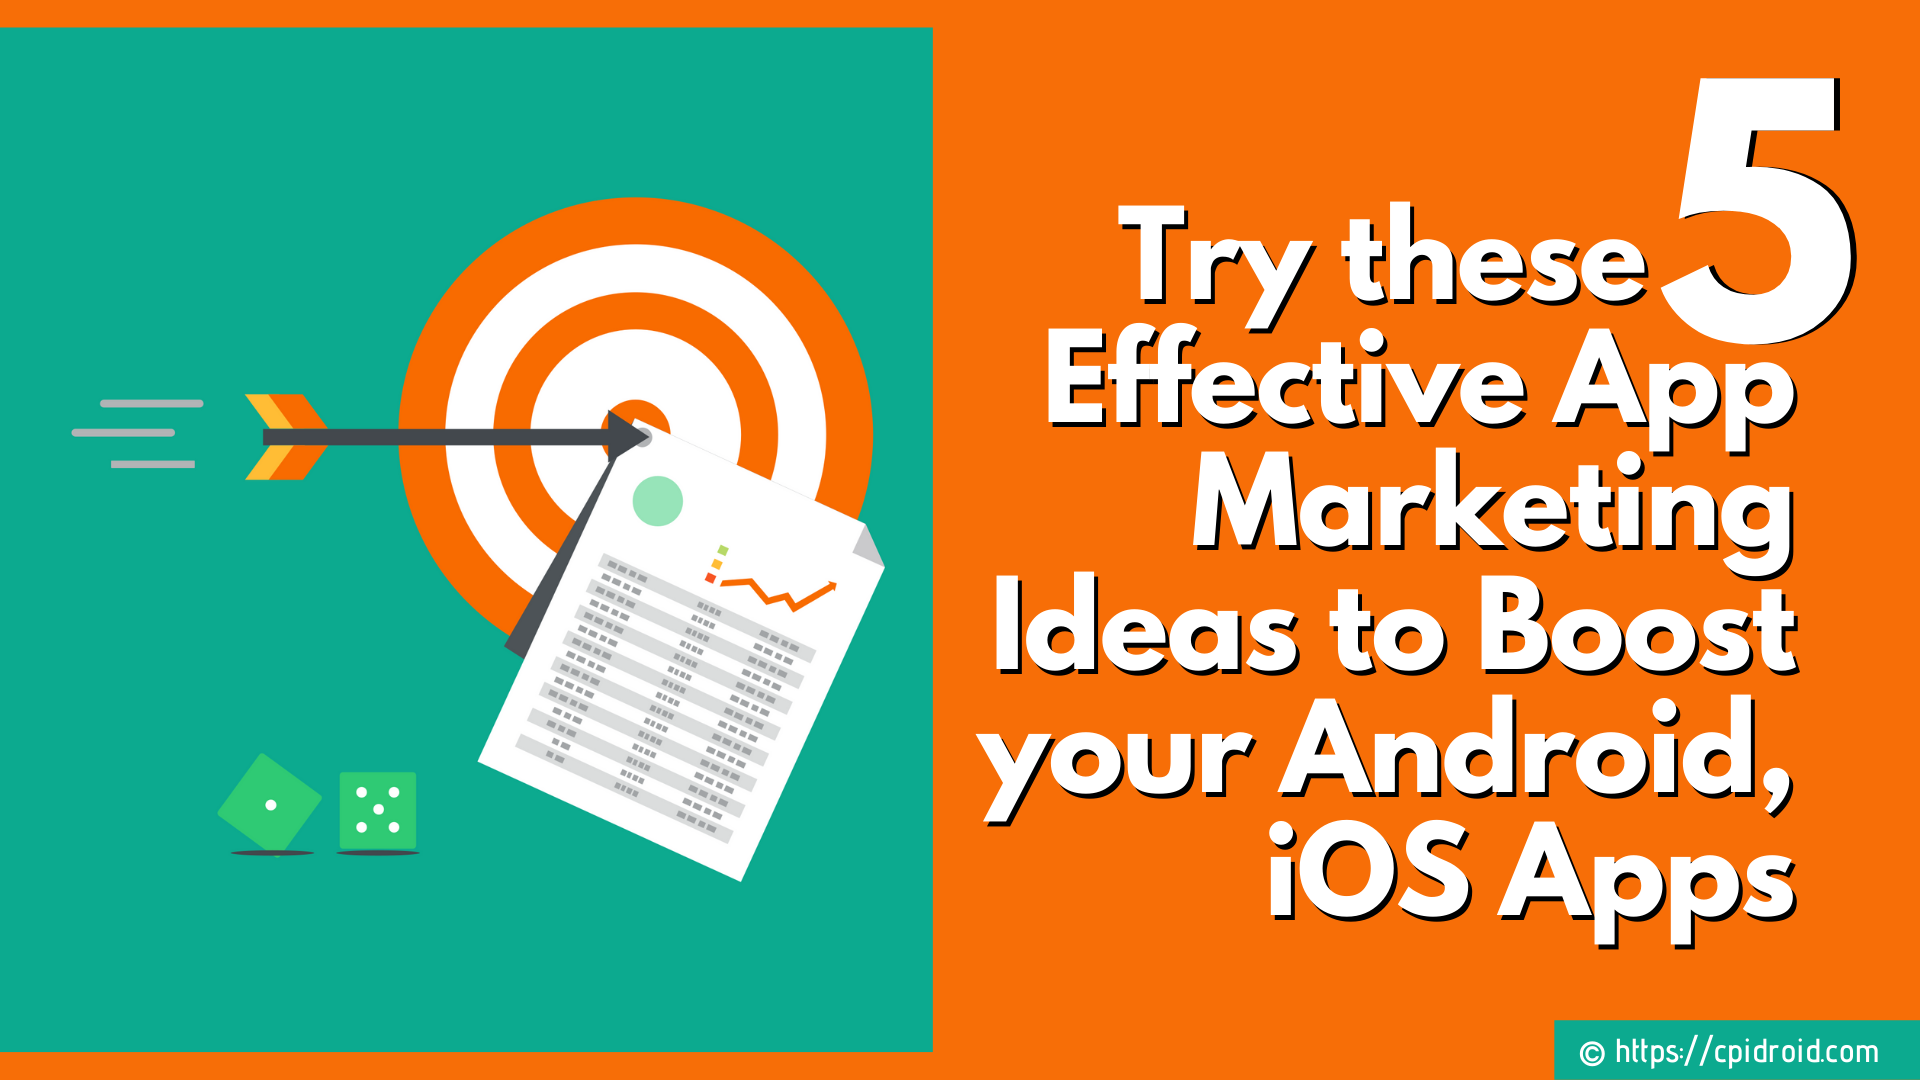 Try these 5 Effective App Marketing Ideas to Boost your Android, iOS Apps